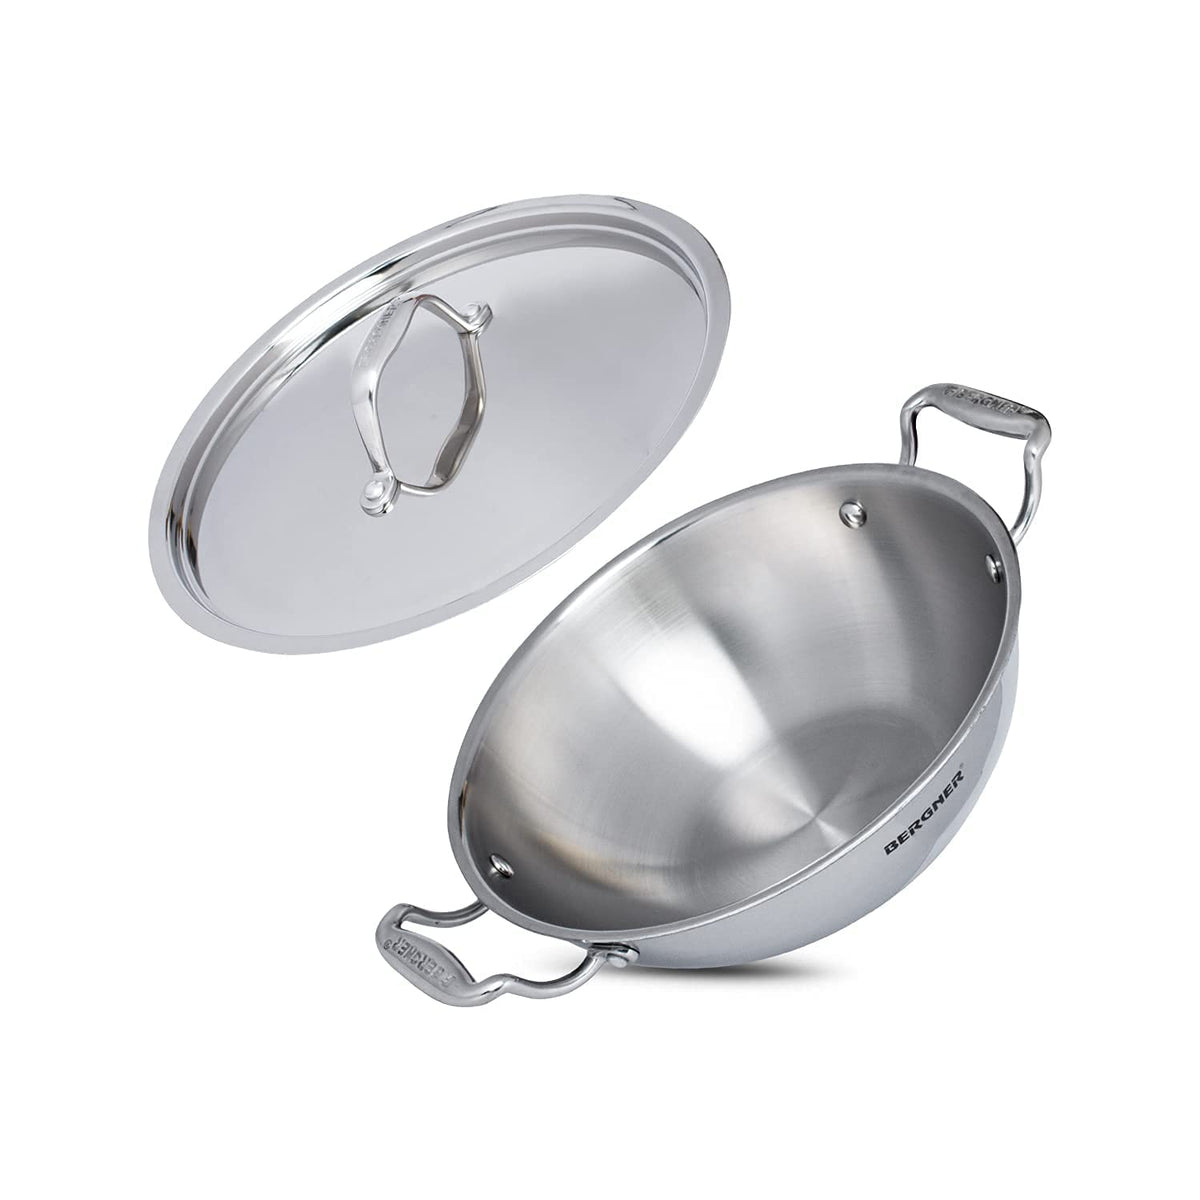 Bergner Argent Triply Deep Kadai, Stainless Steel Lid, For Sauté/Deep Fry/Gravy/Stir Fry/Steam, Heat Resistant Handles, Multi-Layered Mirror Finish, Induction &amp; Gas Ready, 5-Year Warranty